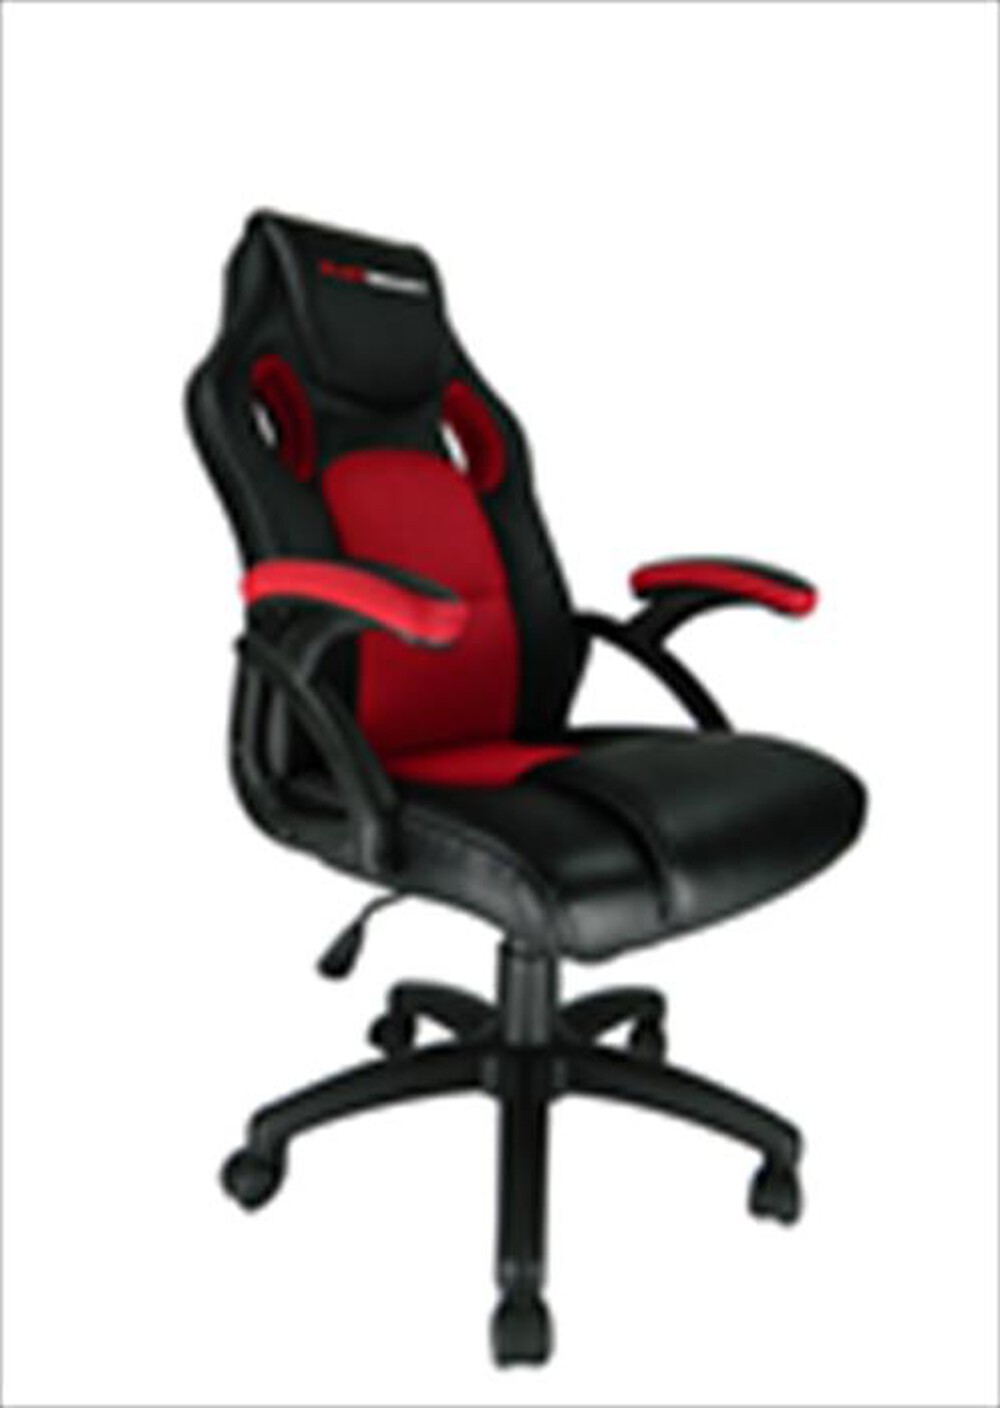 "GO!SMART - PLAYSMART PC GAMING CHAIR RED - Rosso"